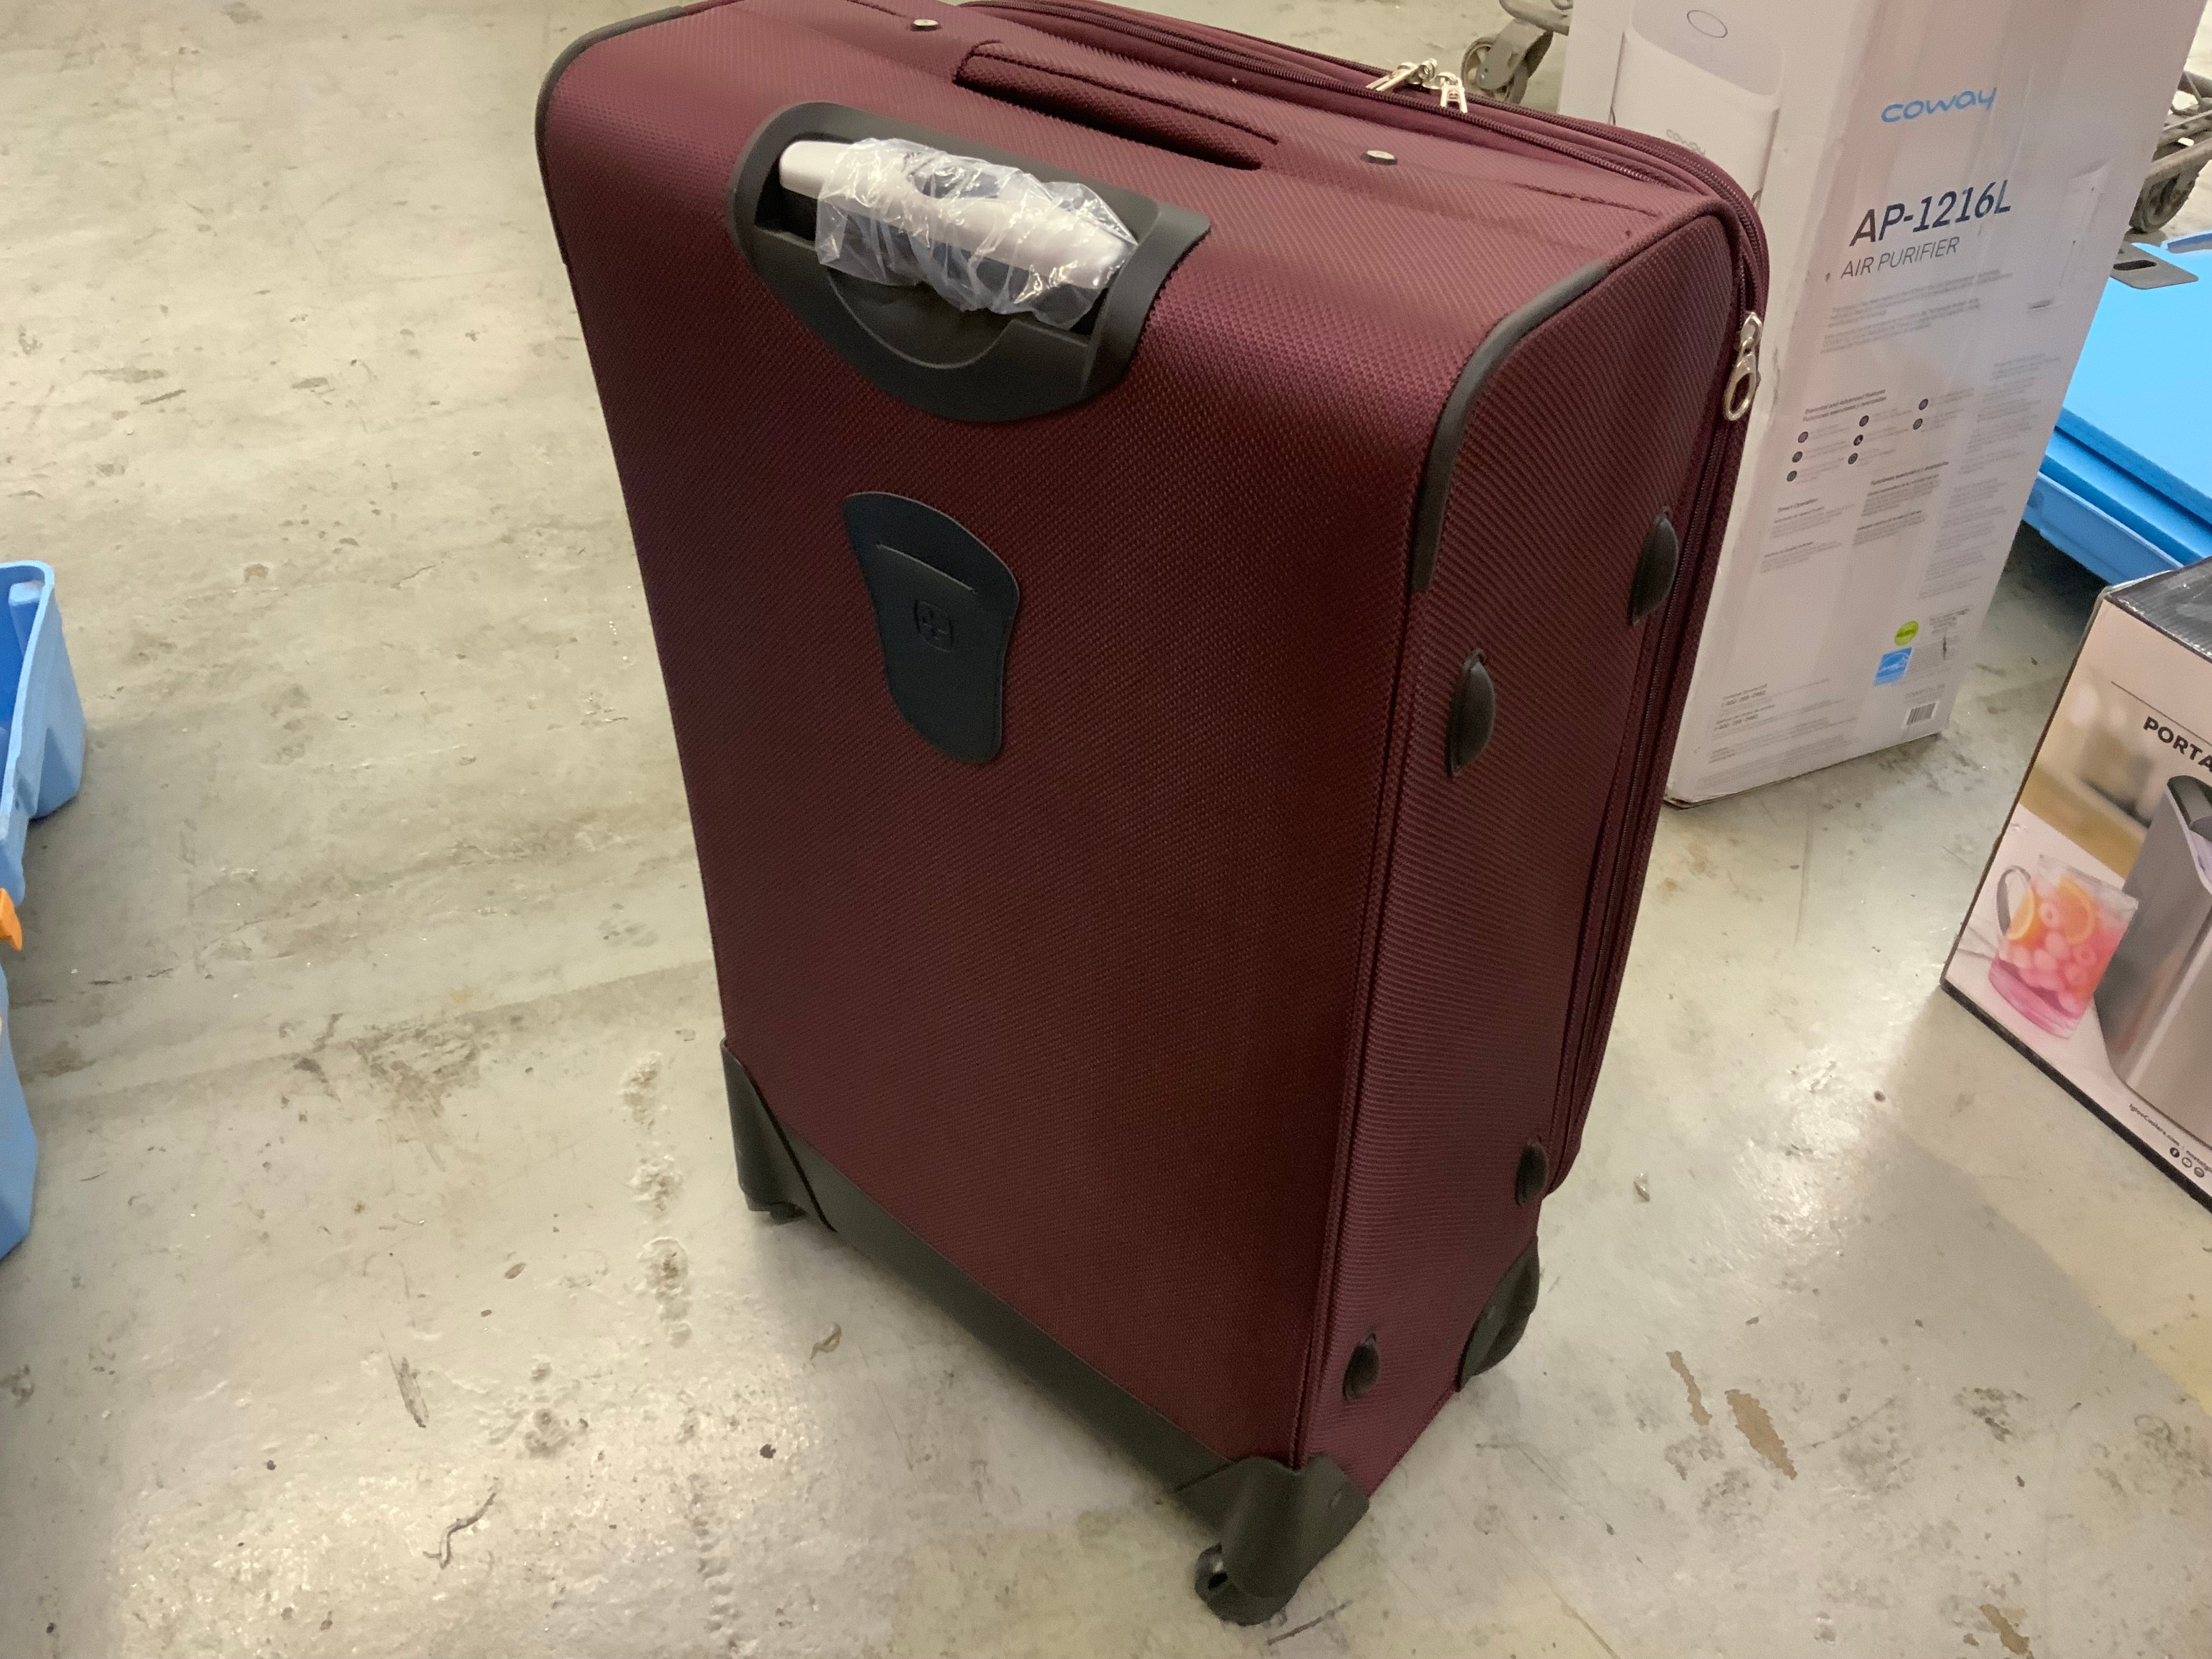 SwissGear Sion Softside Expandable Luggage, Merlot, Checked-Large 29-Inch (8082354733294)